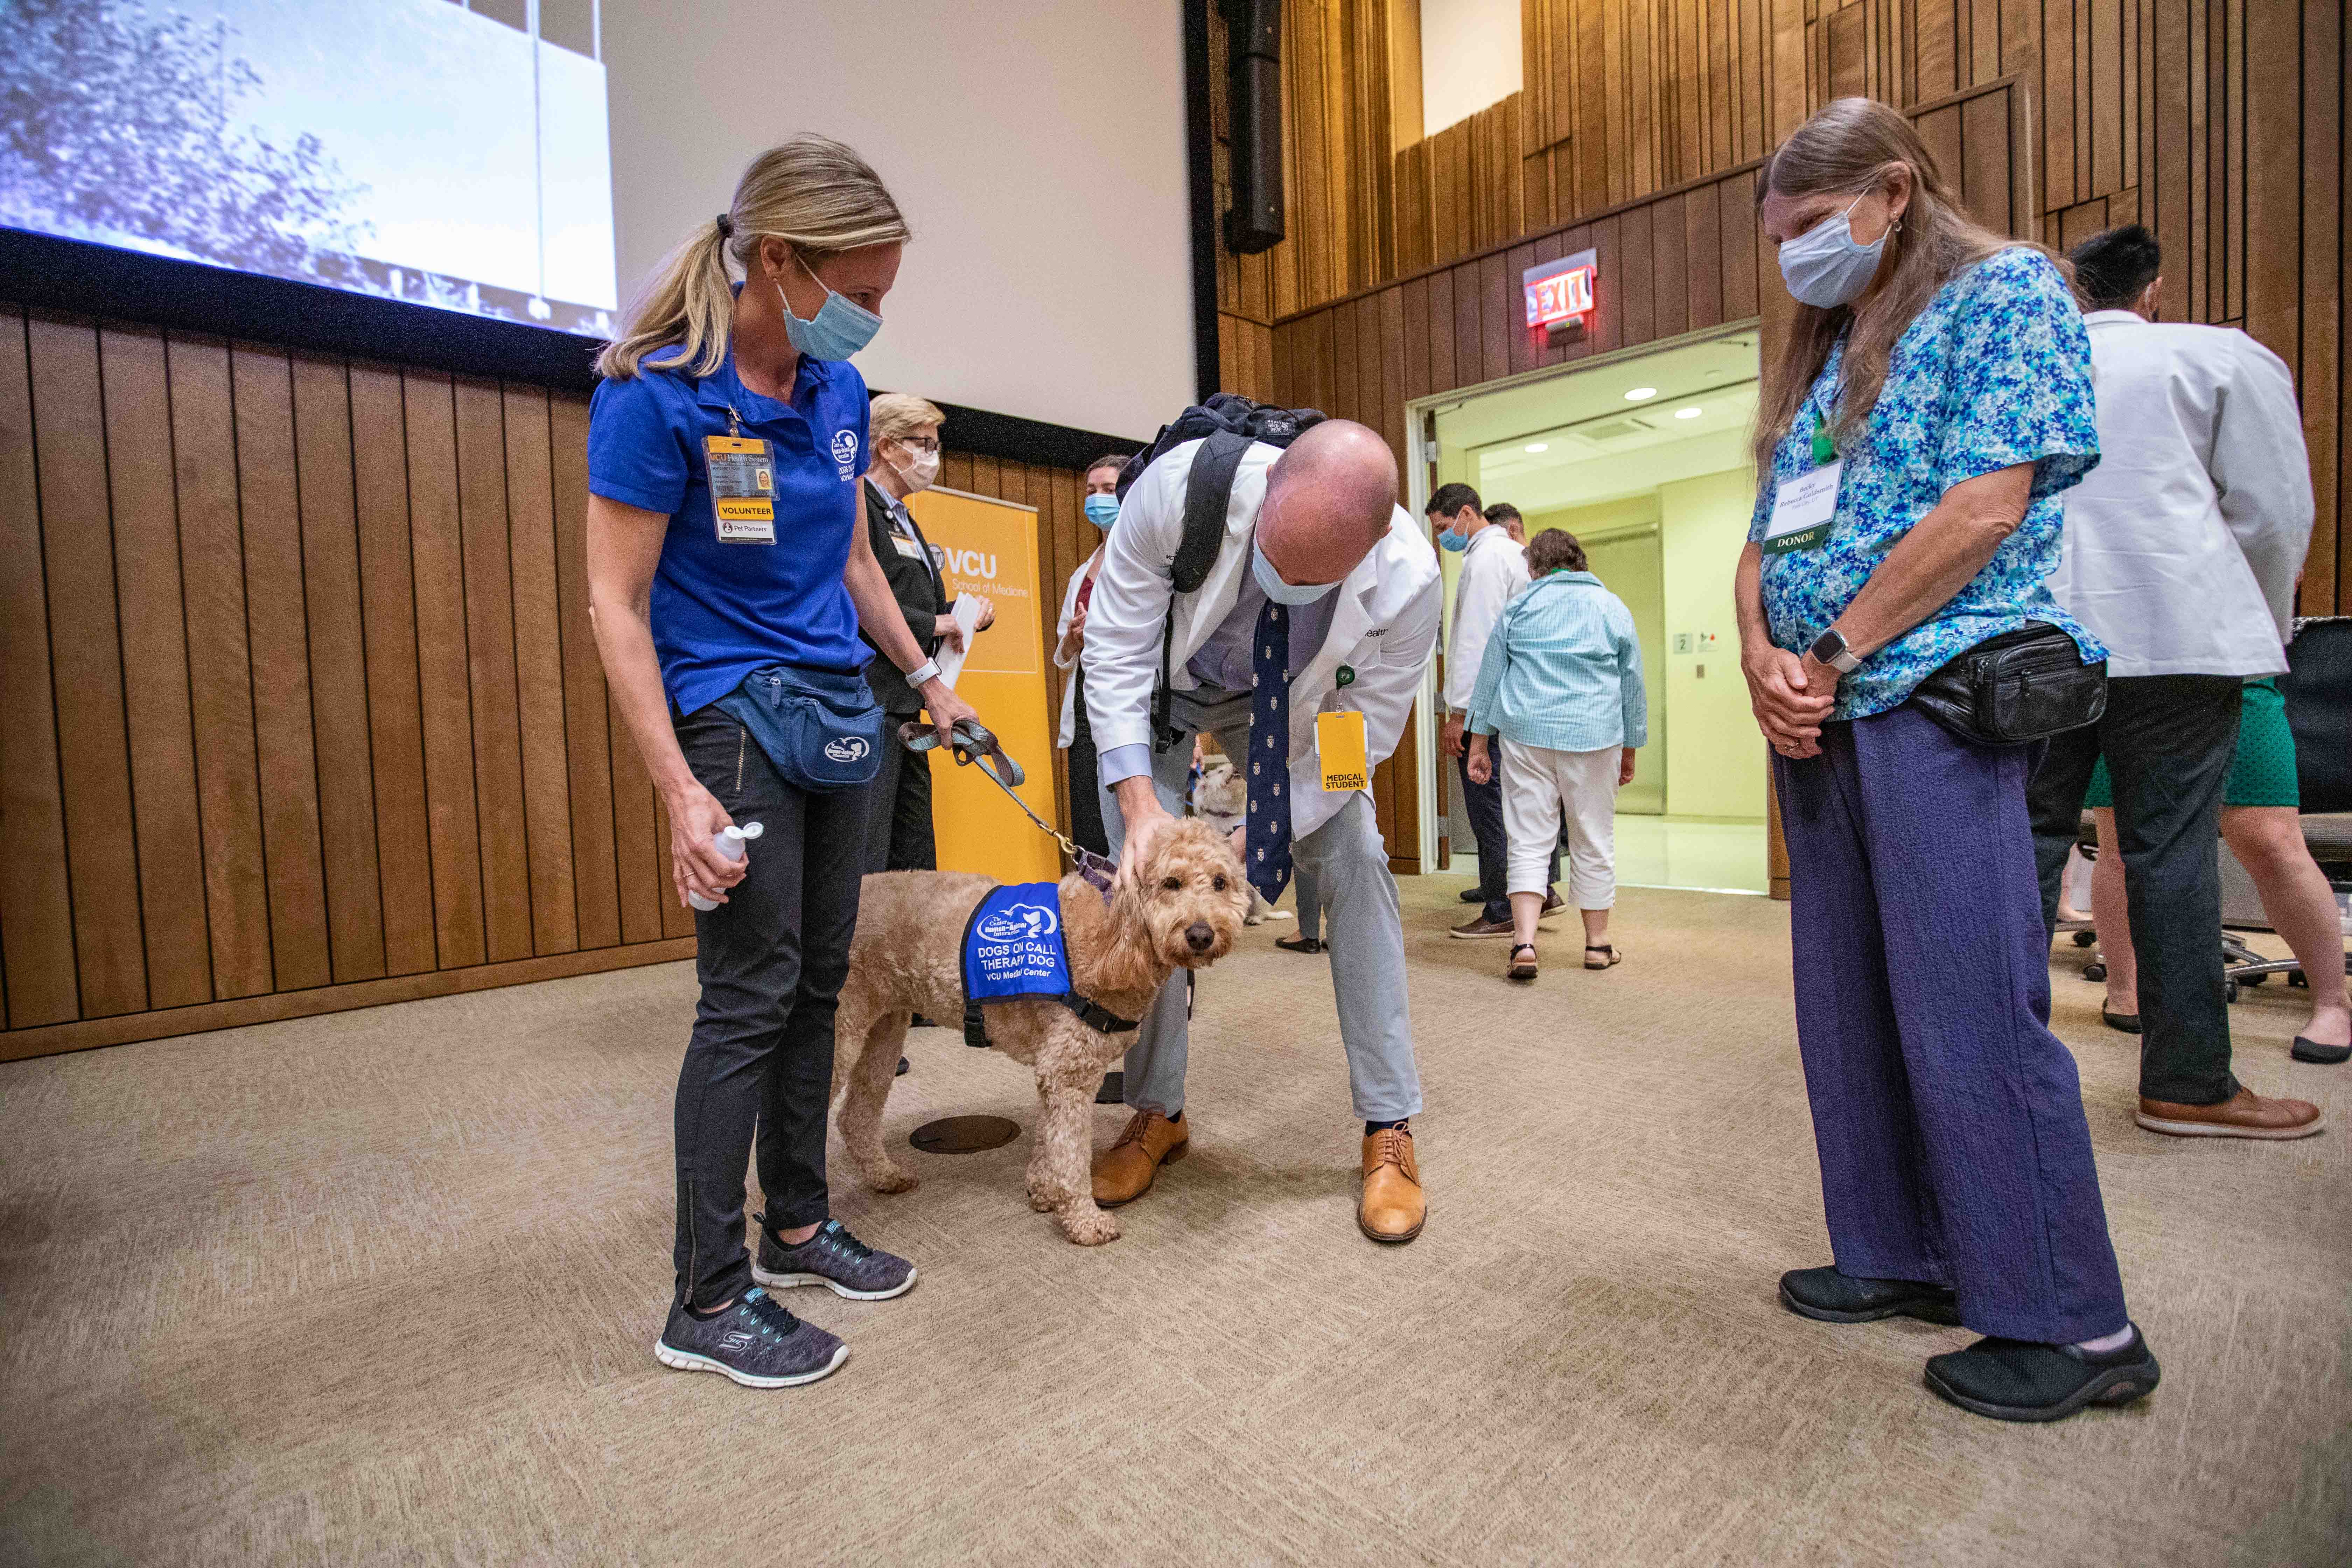  Student pets Dog on Call while handler and alum look on 